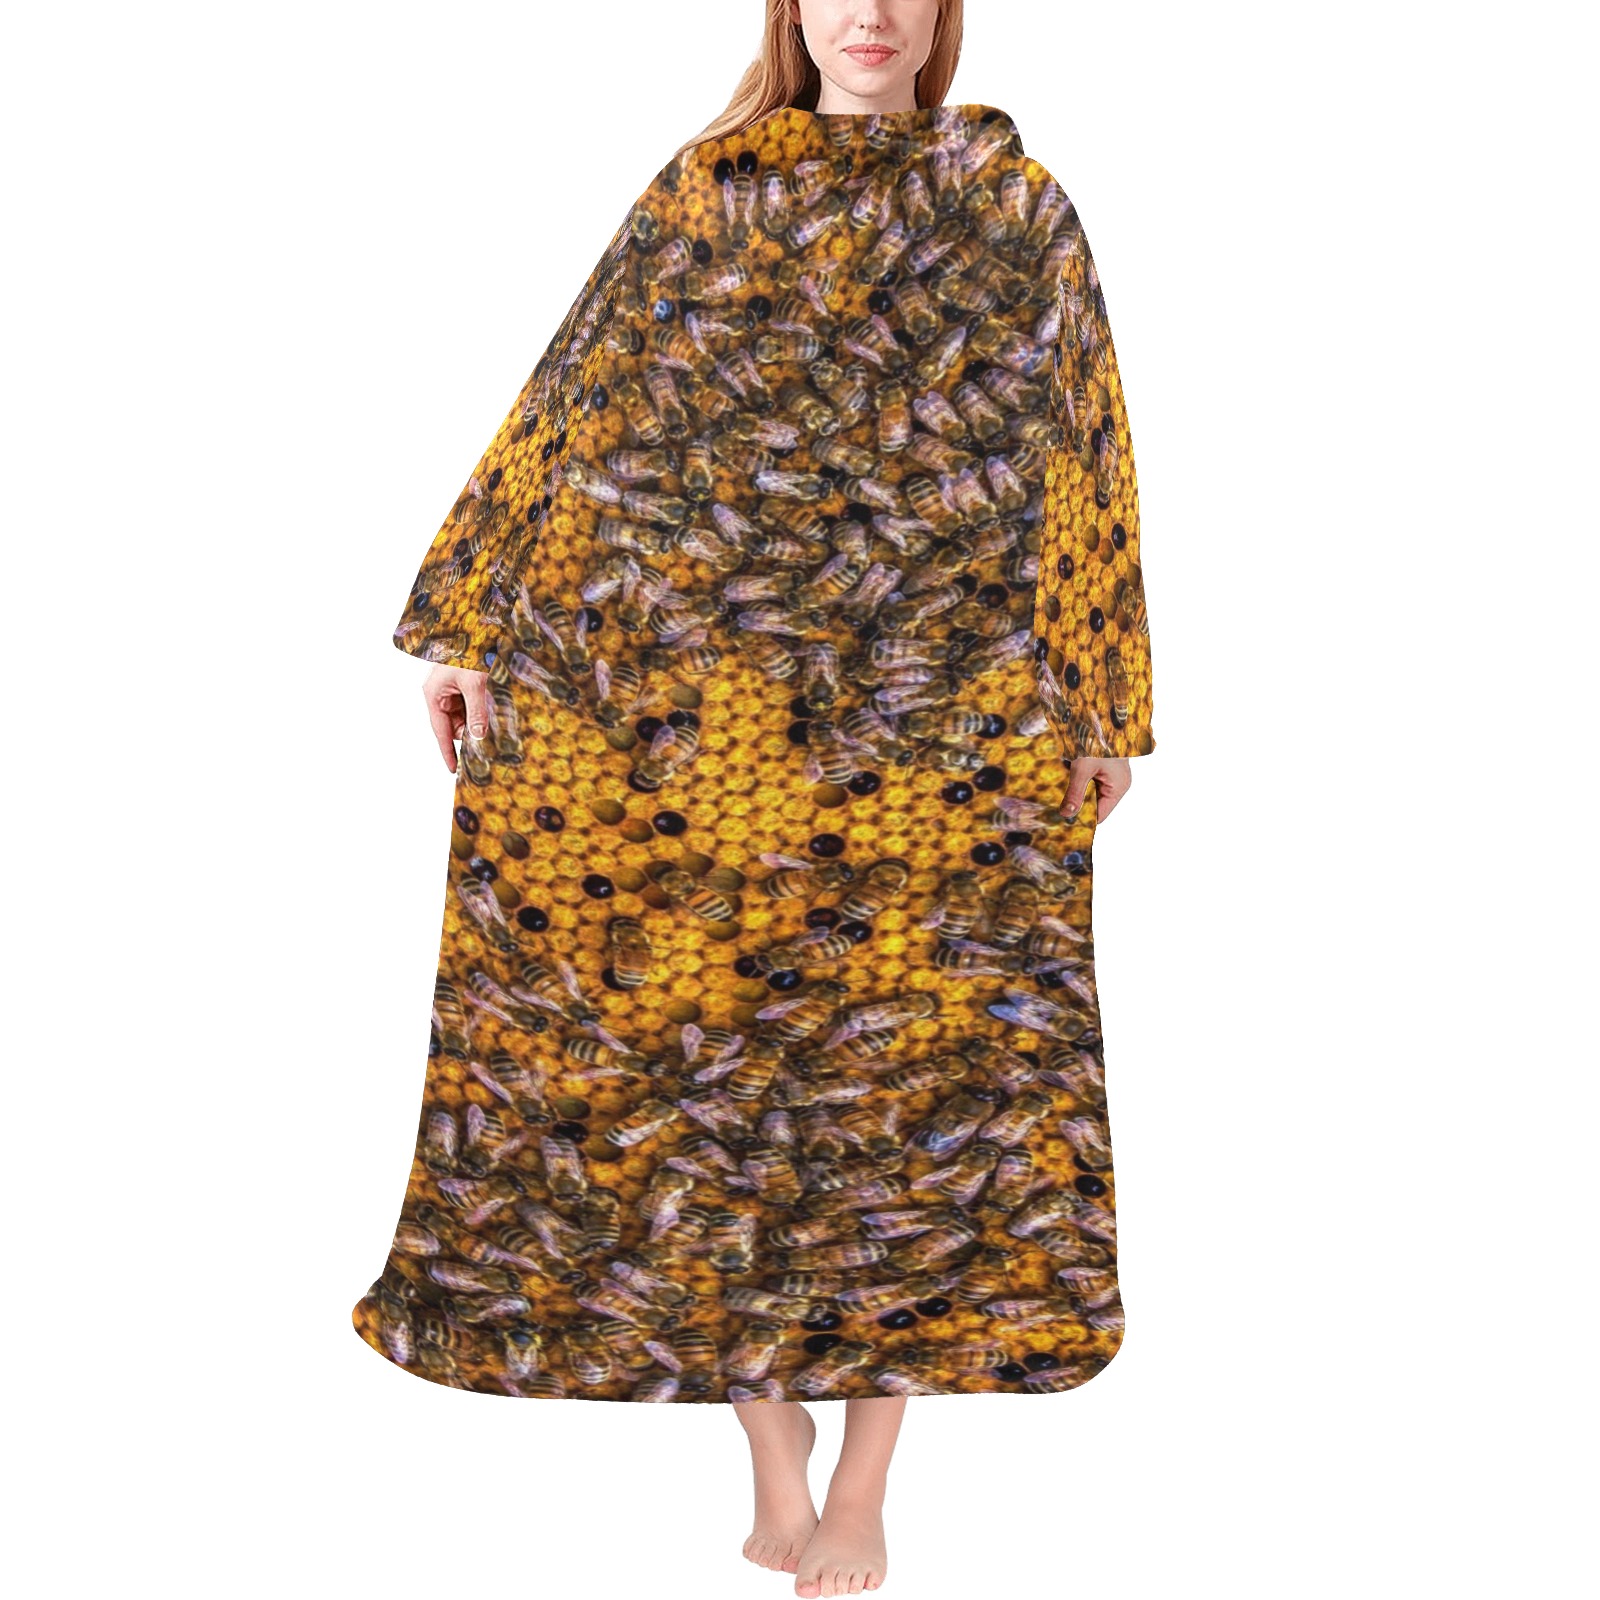 HONEY BEES 3 Blanket Robe with Sleeves for Adults